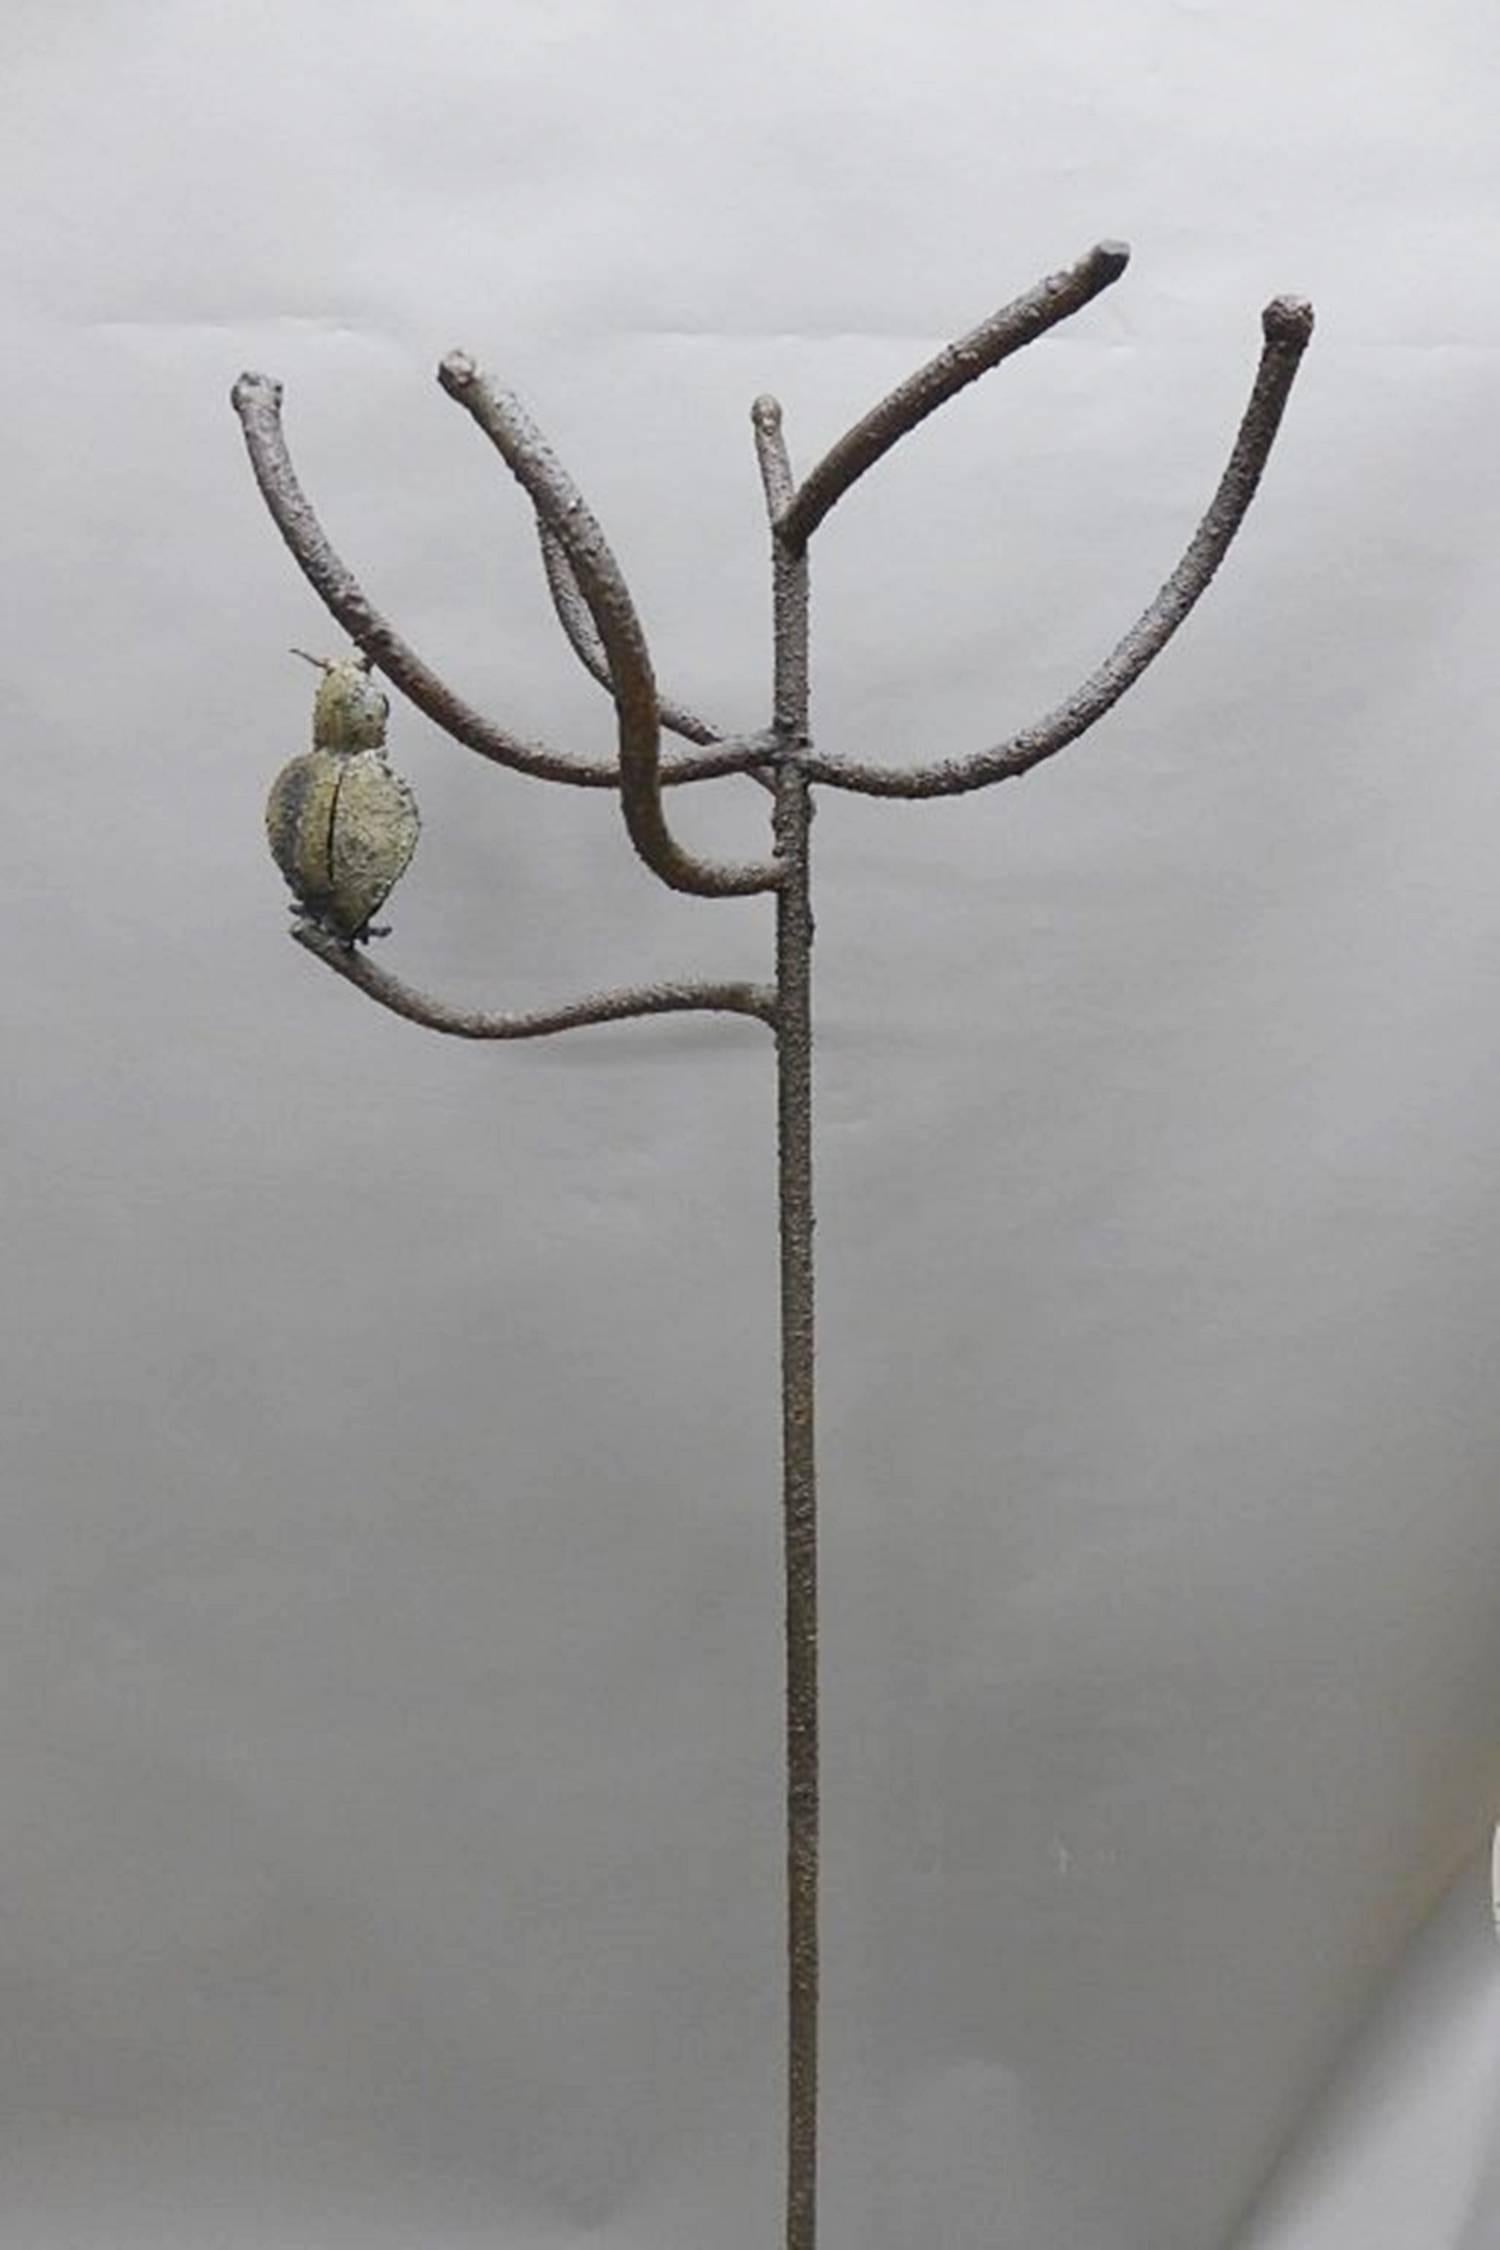 Stunning Mid-Century Modern coat hanger sculpture in the Brutalist style in the manner of Silas Seandel.
The piece is very whimsical and unique, there is an owl sculpture perching in one of the branches, the piece is tall and perfect to be used as